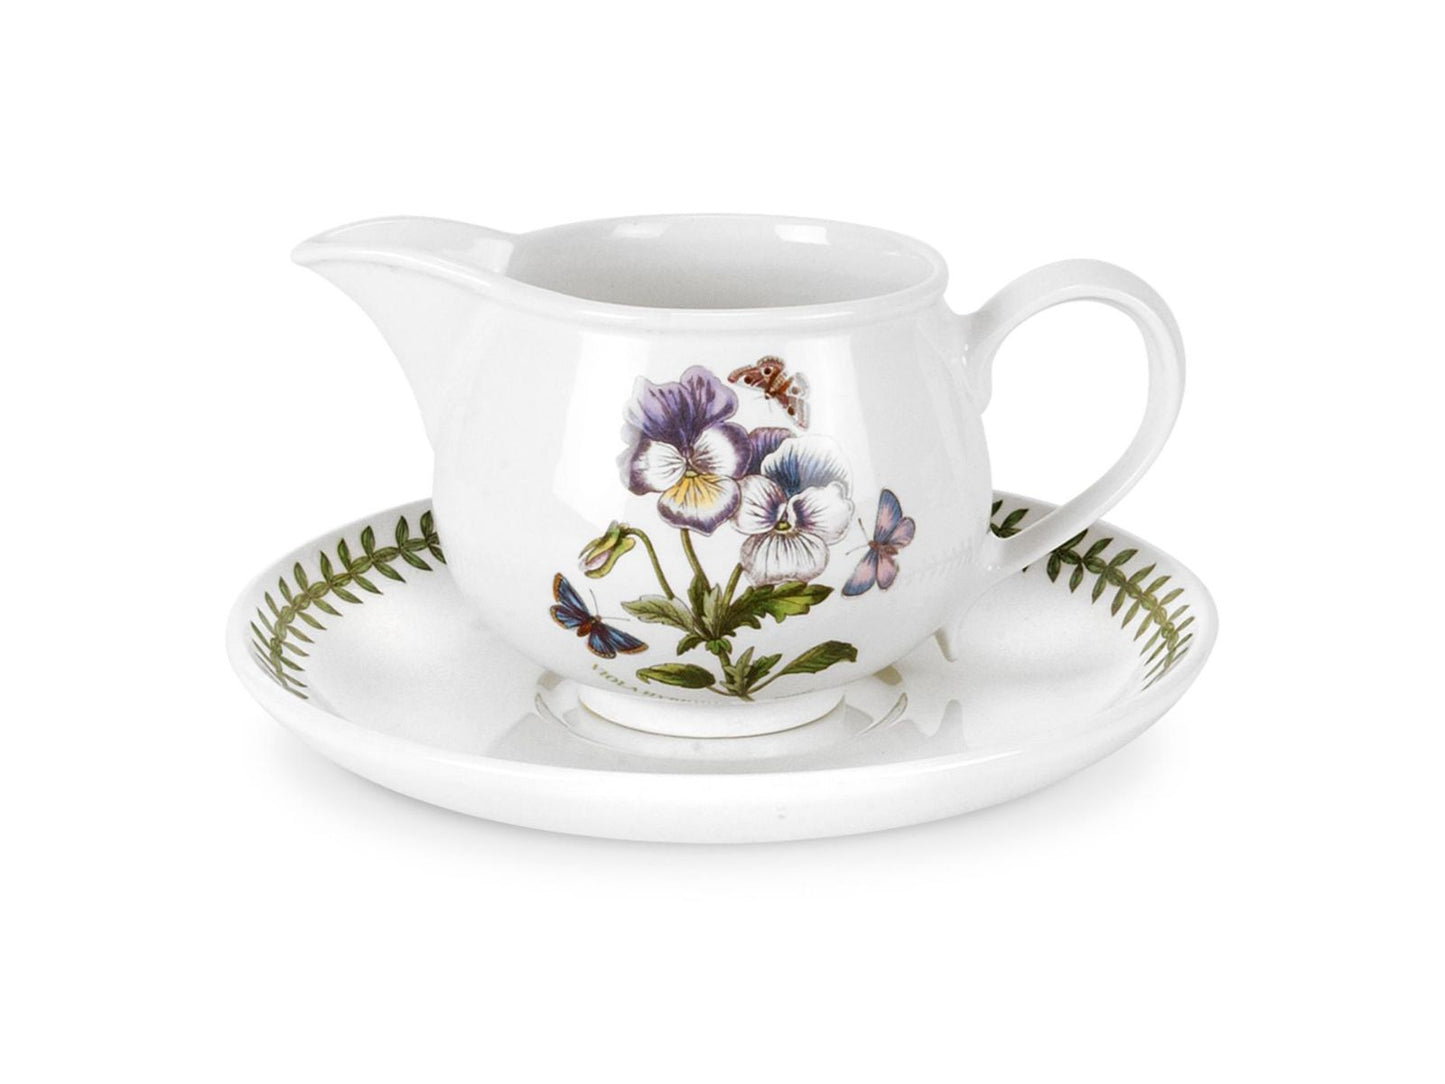 Shop for the Portmeirion Botanic Garden Gravy Boat and Stand